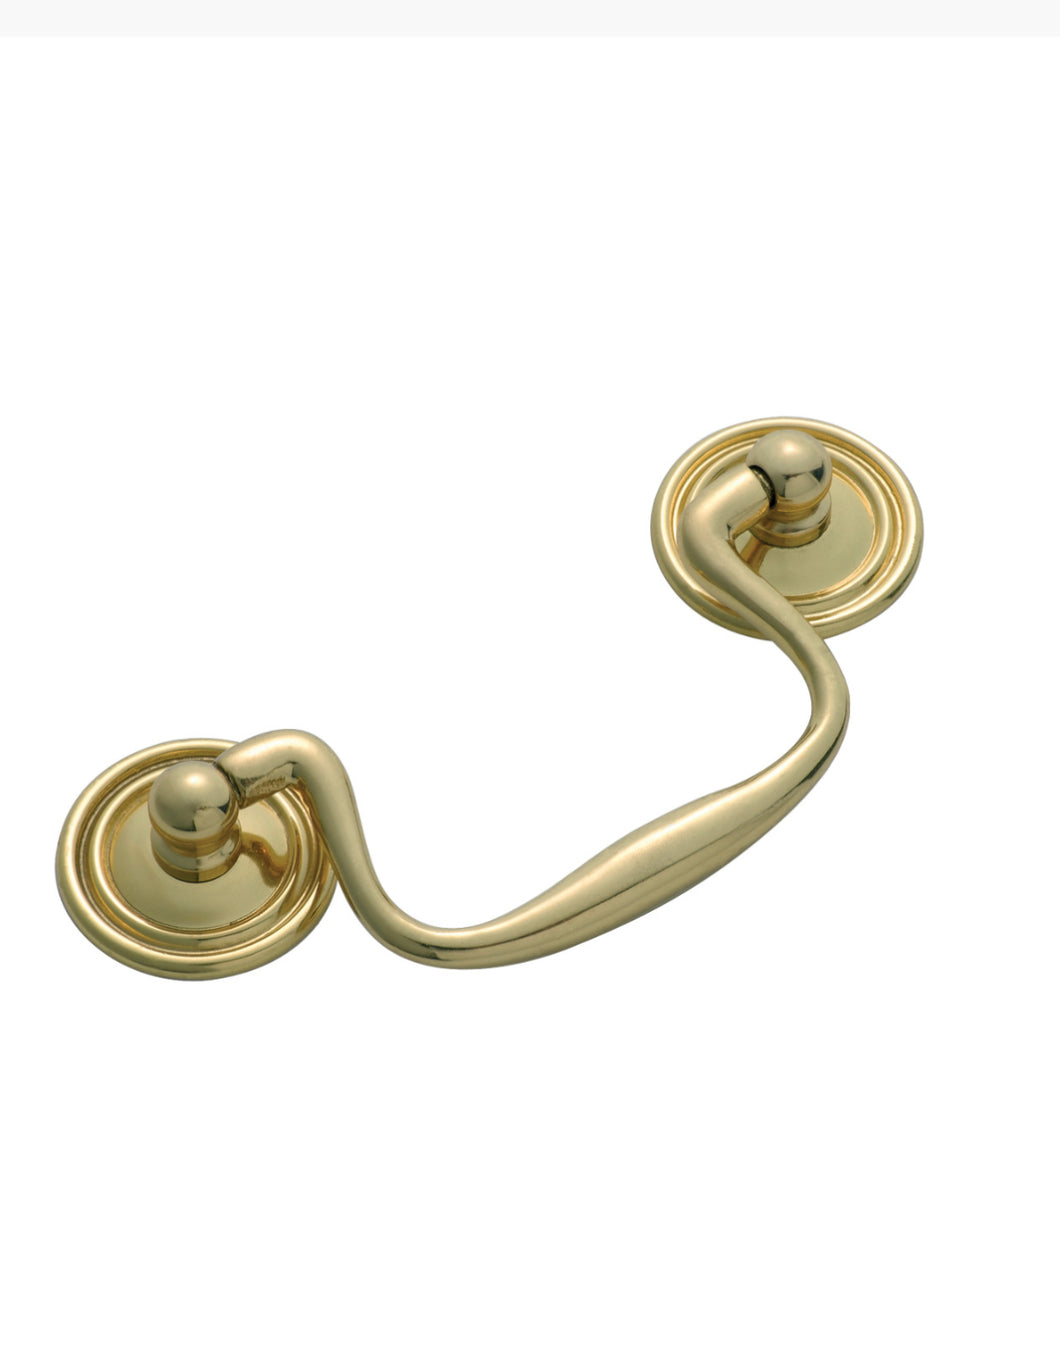 Tradco 3450 polished brass swan neck handle